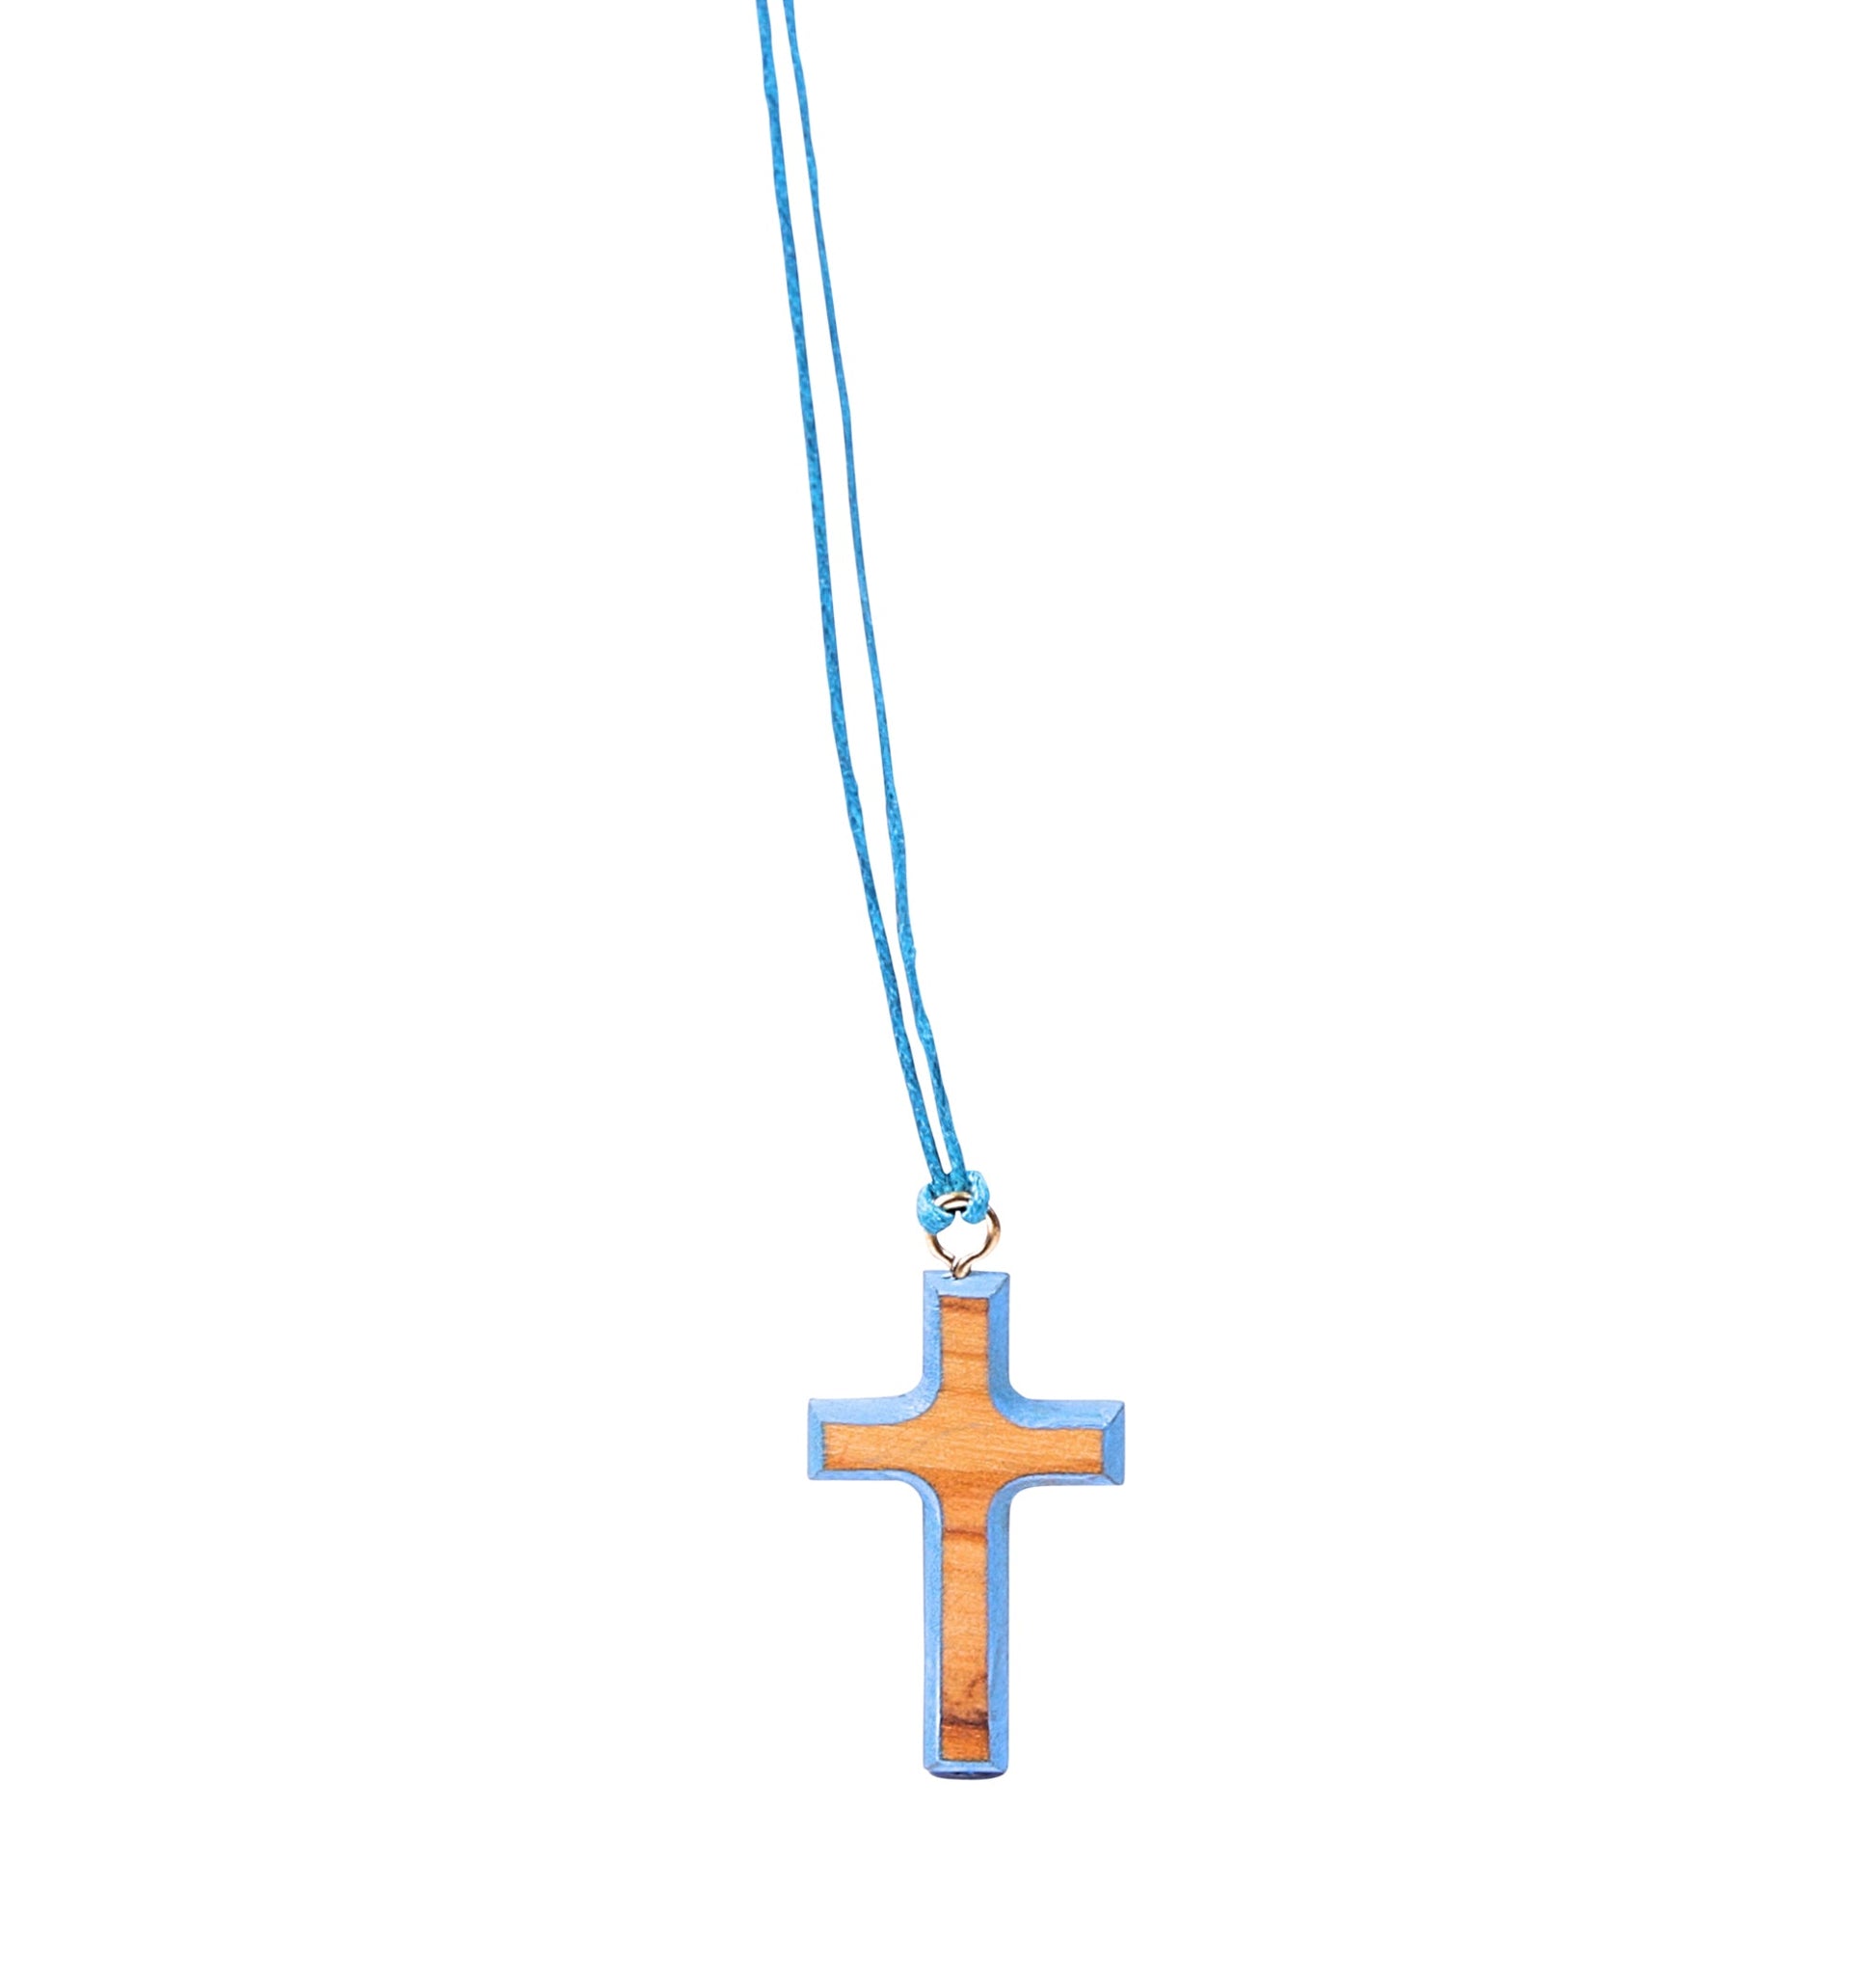 Wooden cross pendant with colored painted edges, suspended from a matching colored cord.